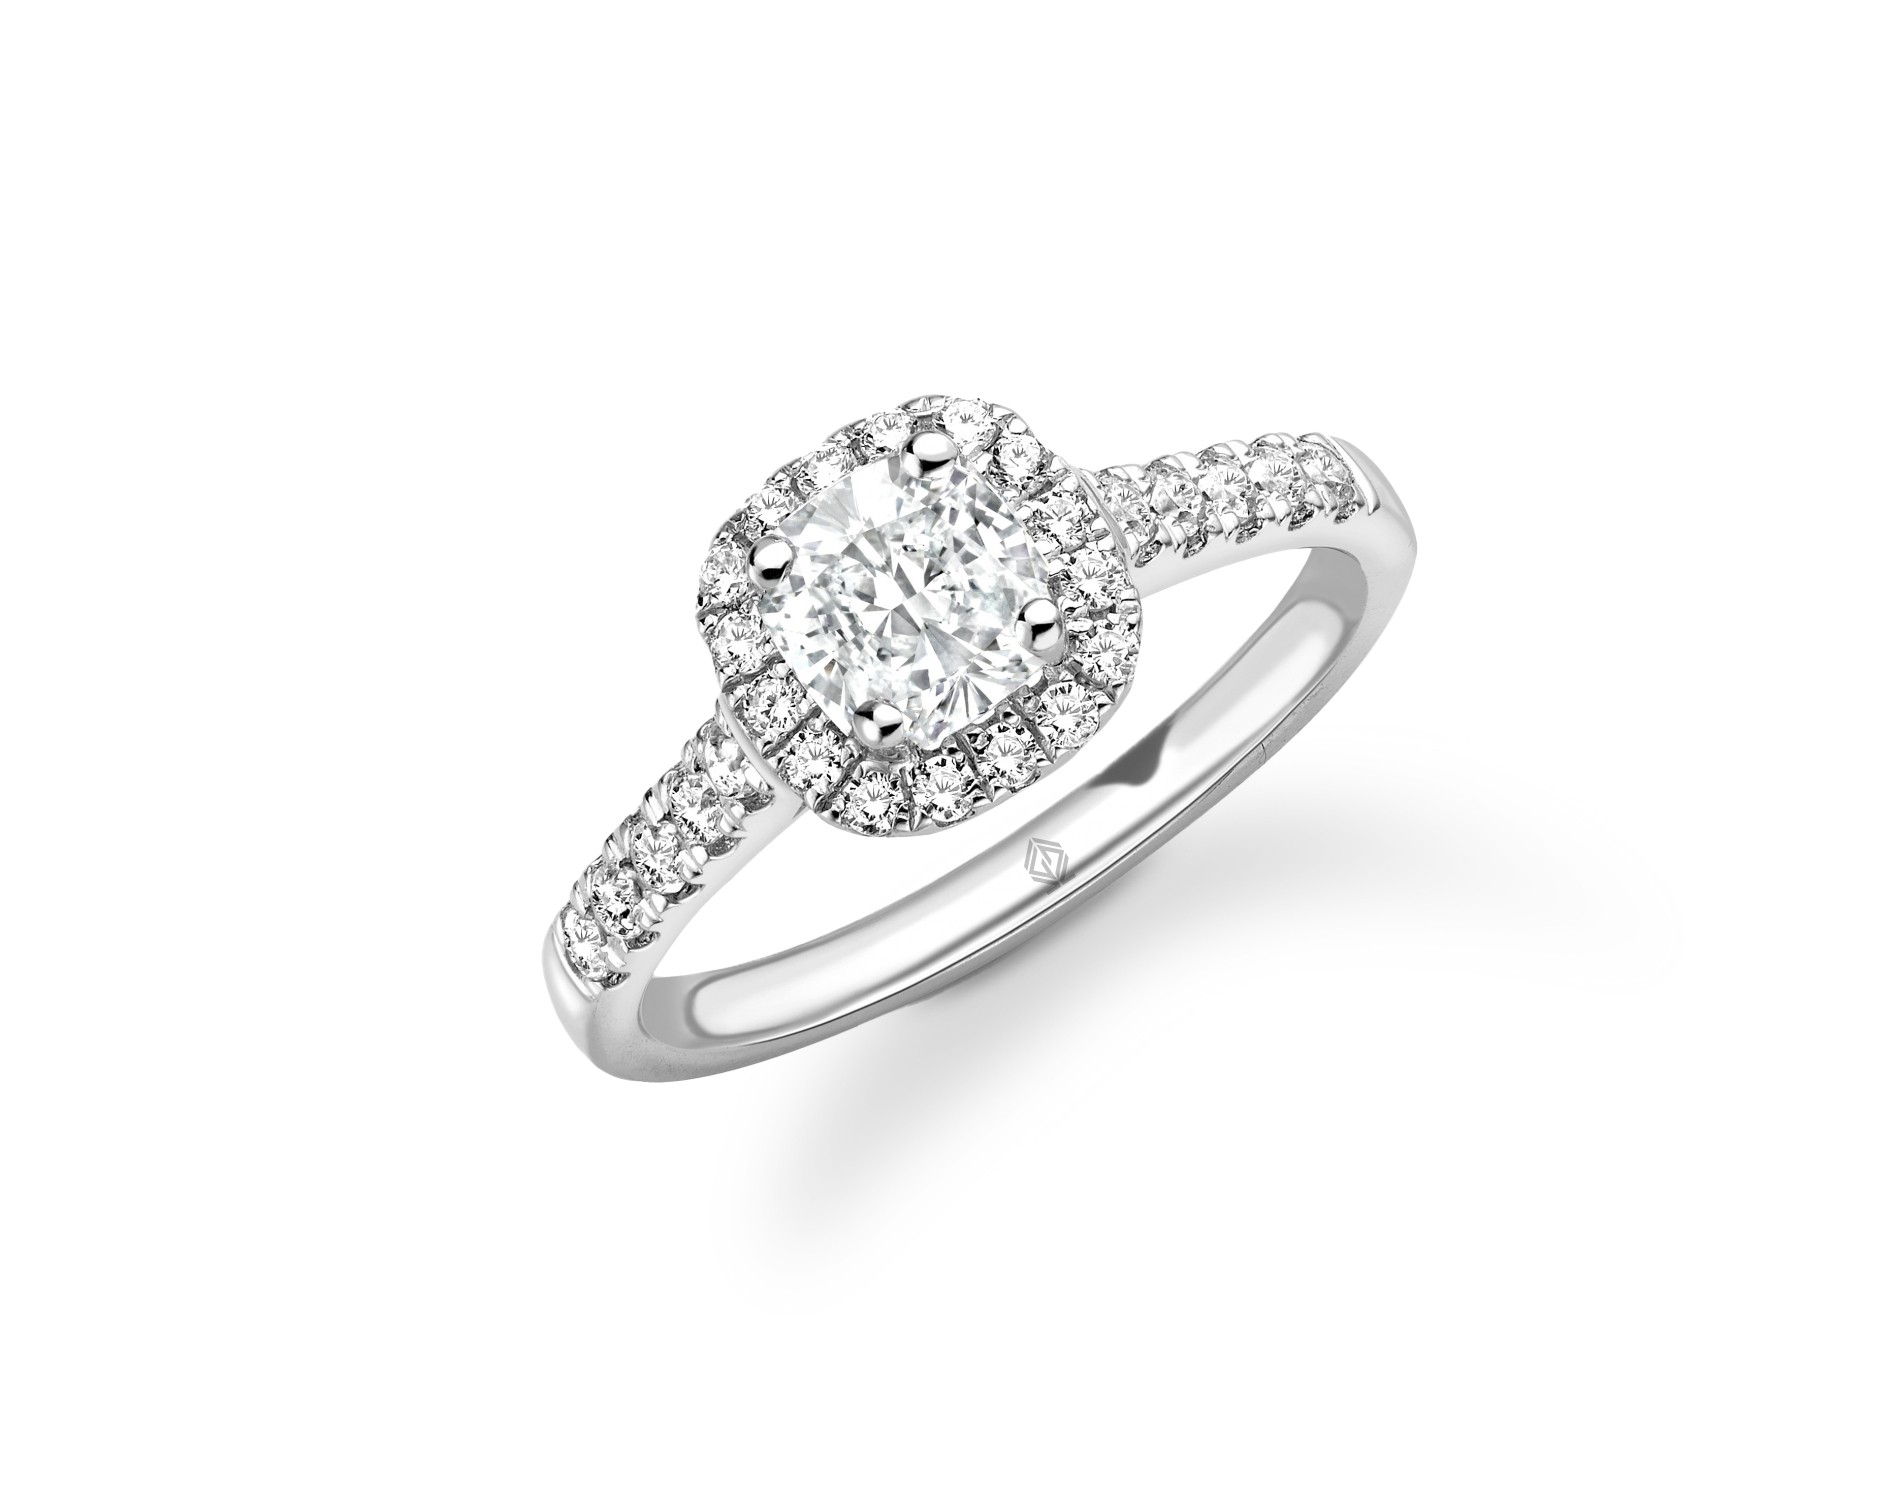 18K WHITE GOLD CUSHION SHAPED HALO DIAMOND ENGAGEMENT RING WITH SIDE STONES IN PAVE SET